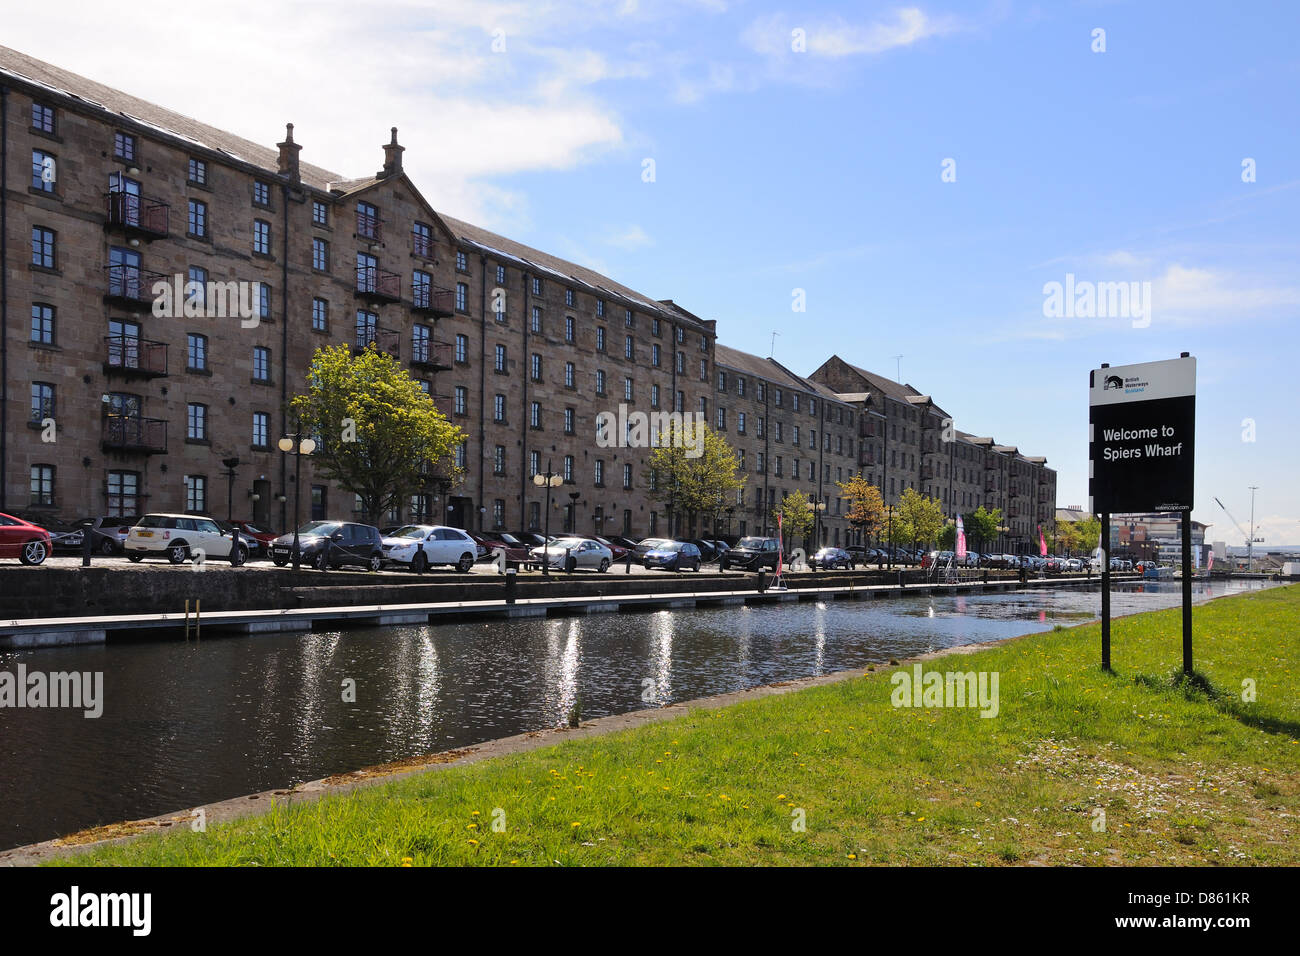 Forth and Clyde canal at Speirs Wharf Stock Photo